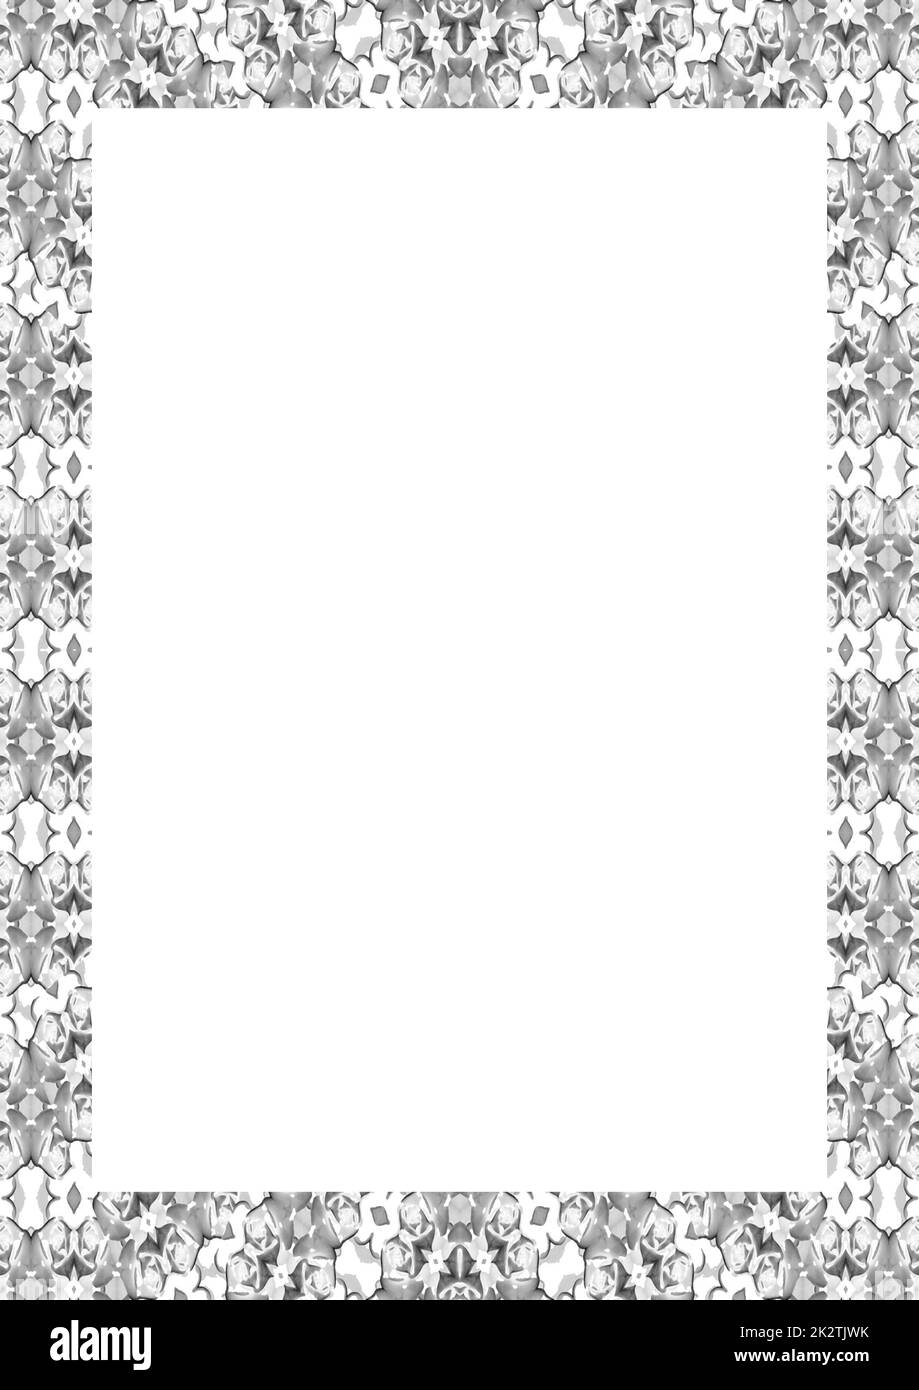 White Background With Patterned Borders Stock Photo